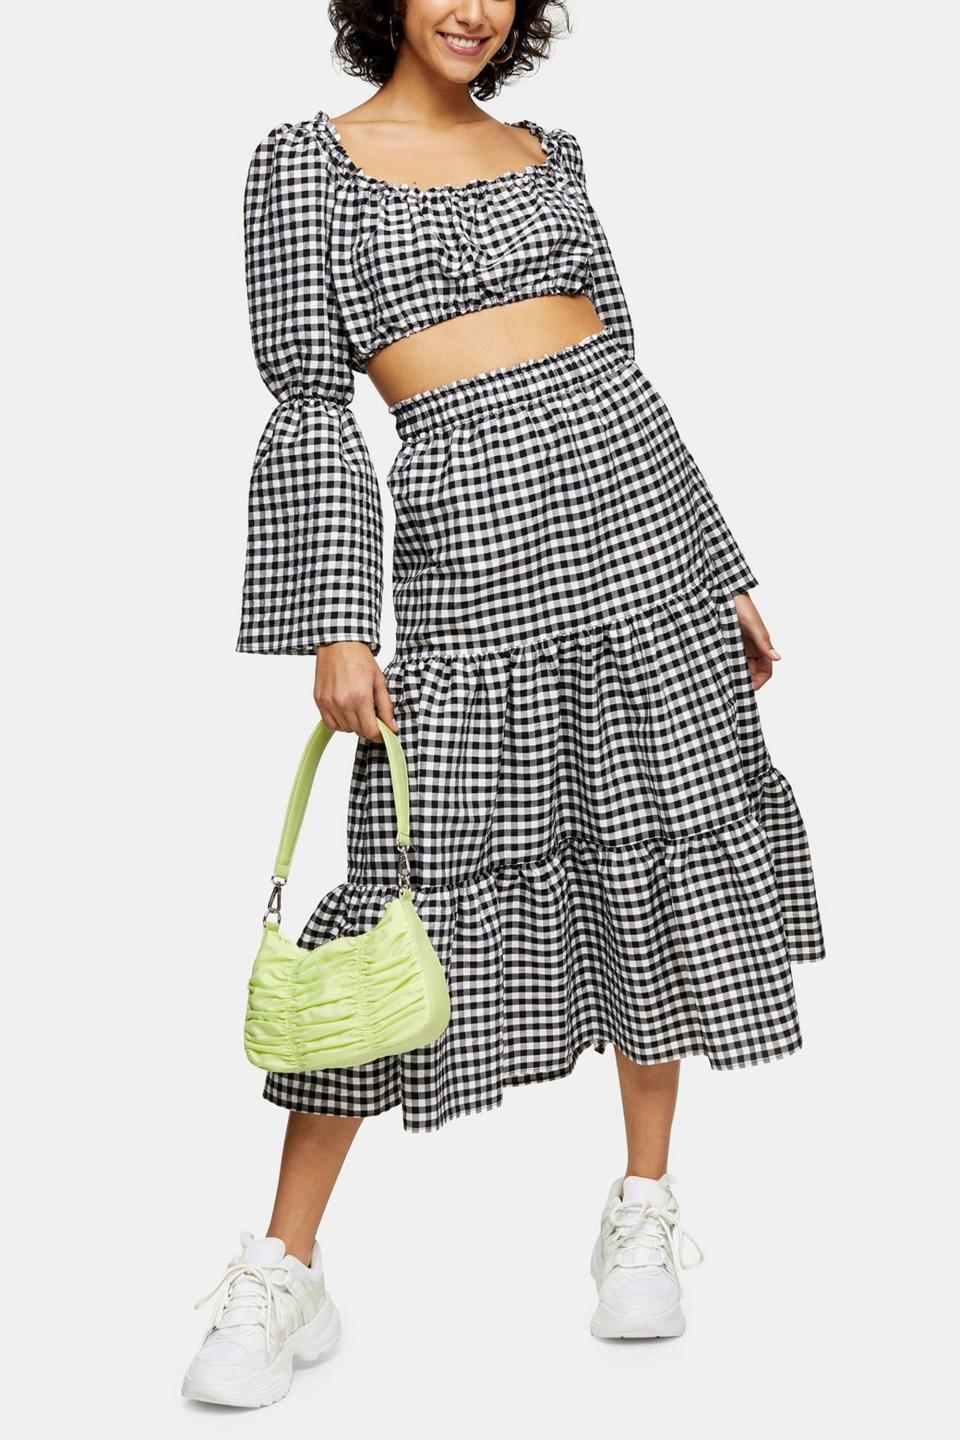 Black and White Gingham Tiered Skirt